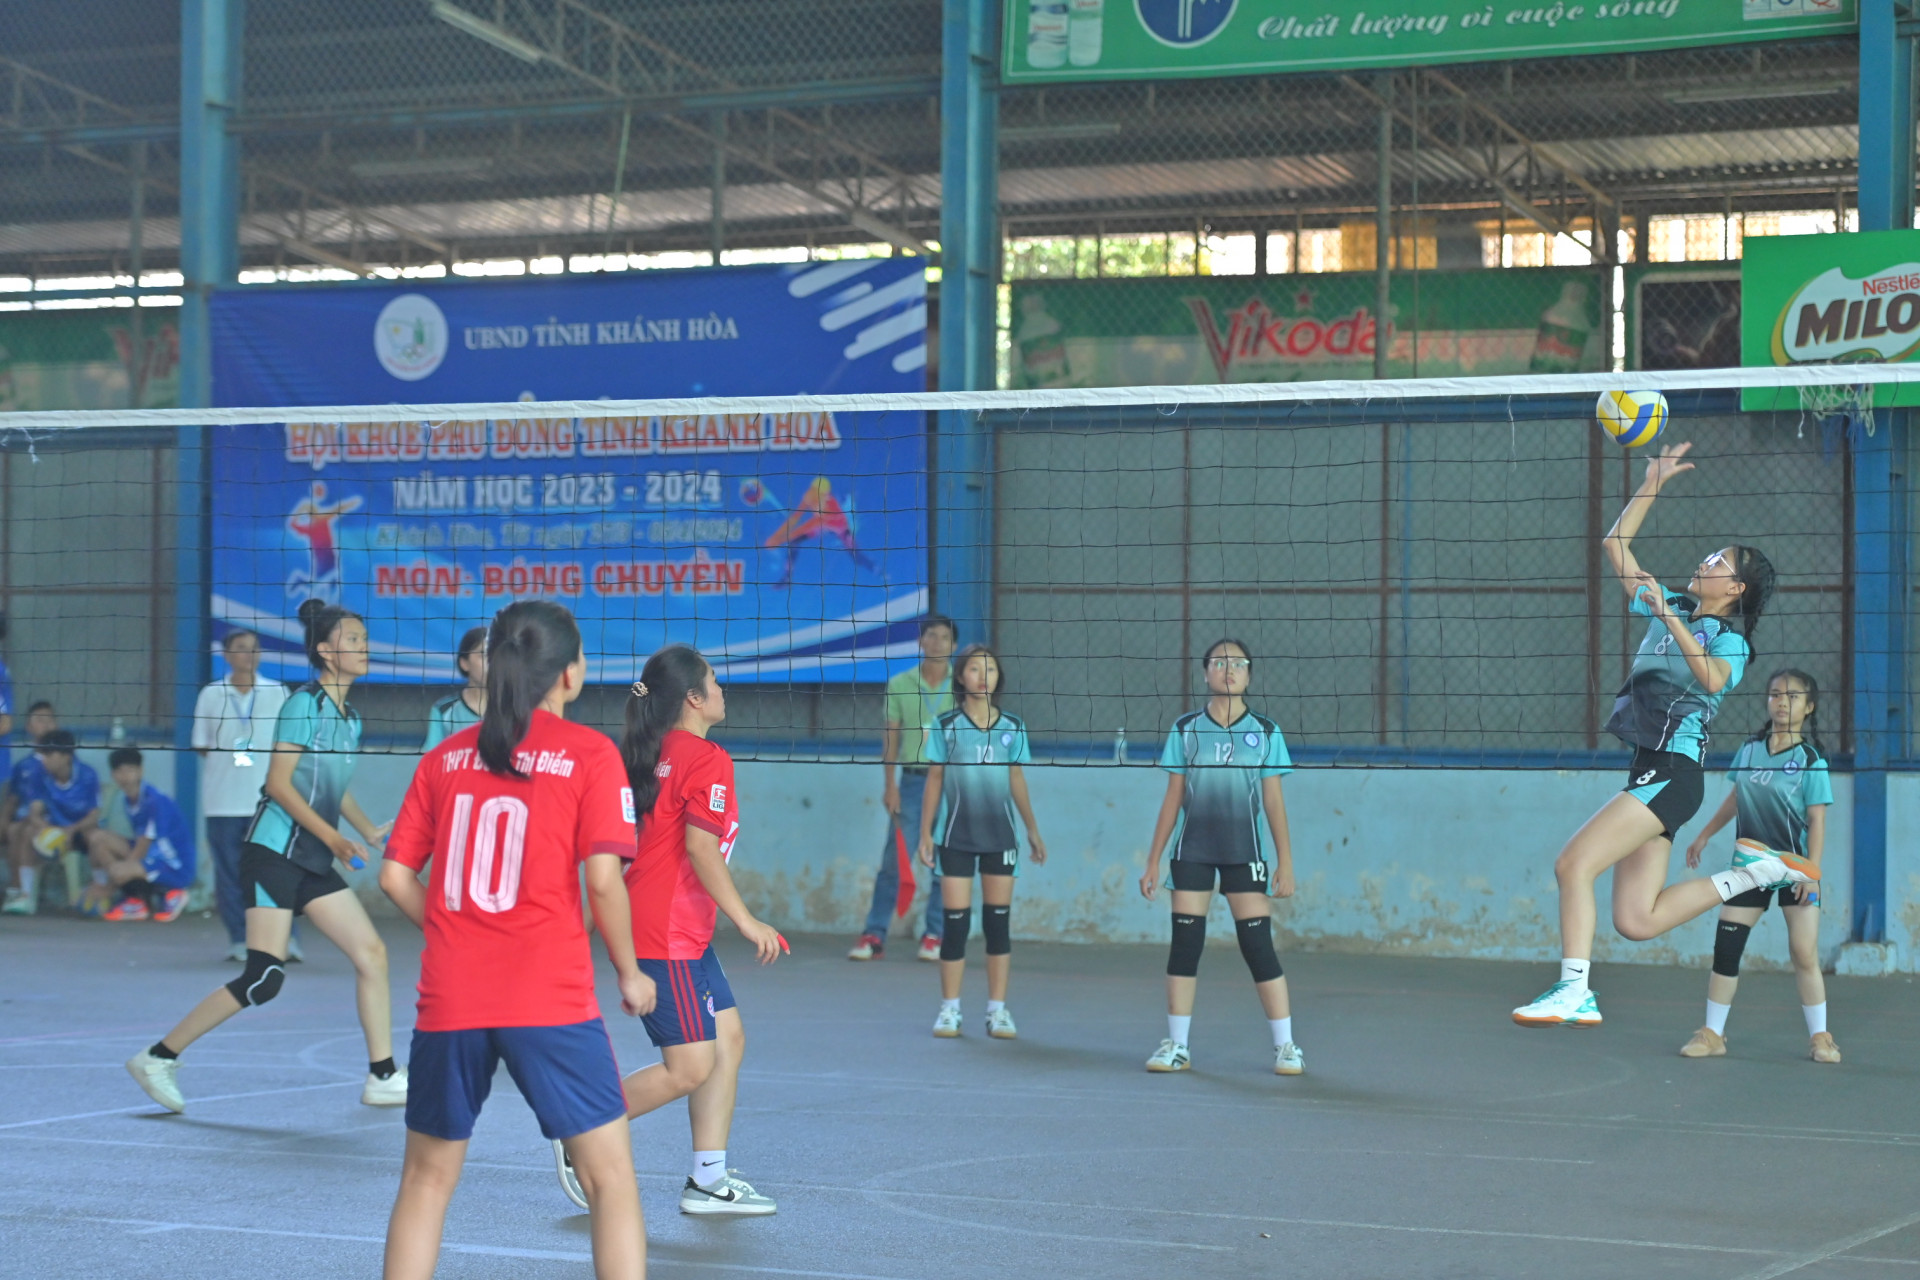 The players competing in volleyball

